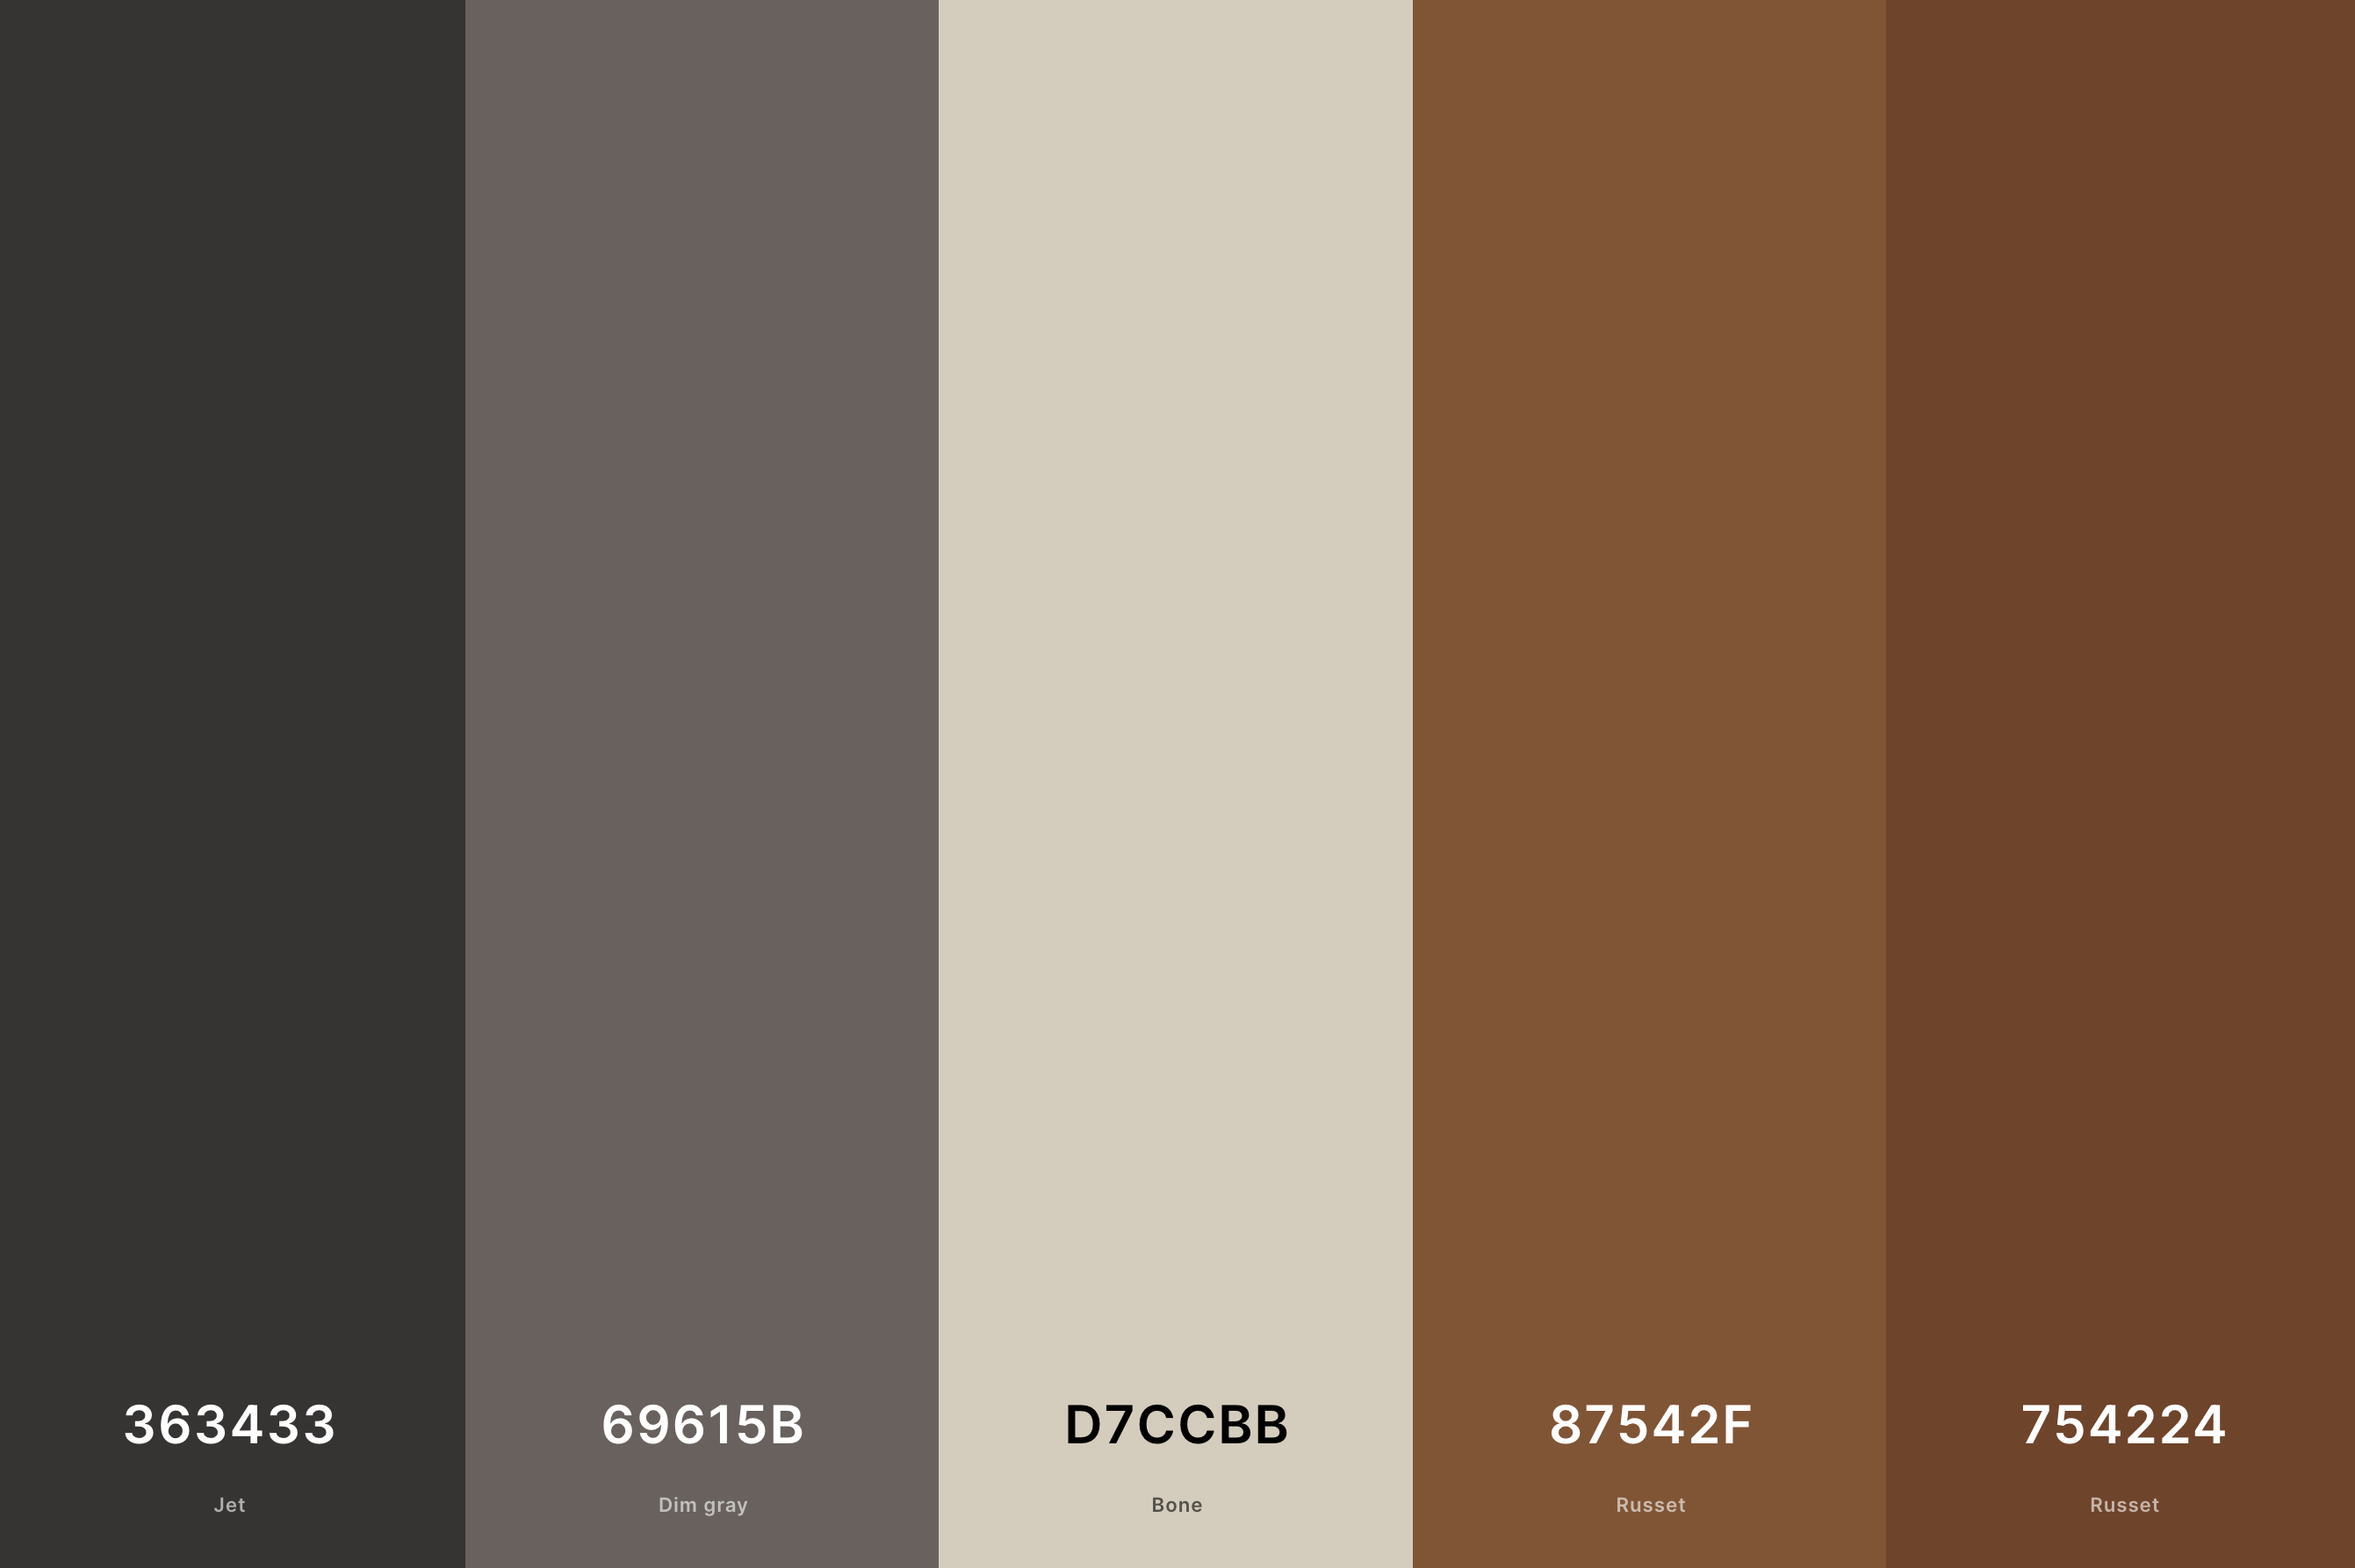 7. Brown And Gray Color Palette Color Palette with Jet (Hex #363433) + Dim Gray (Hex #69615B) + Bone (Hex #D7CCBB) + Russet (Hex #87542F) + Russet (Hex #754224) Color Palette with Hex Codes